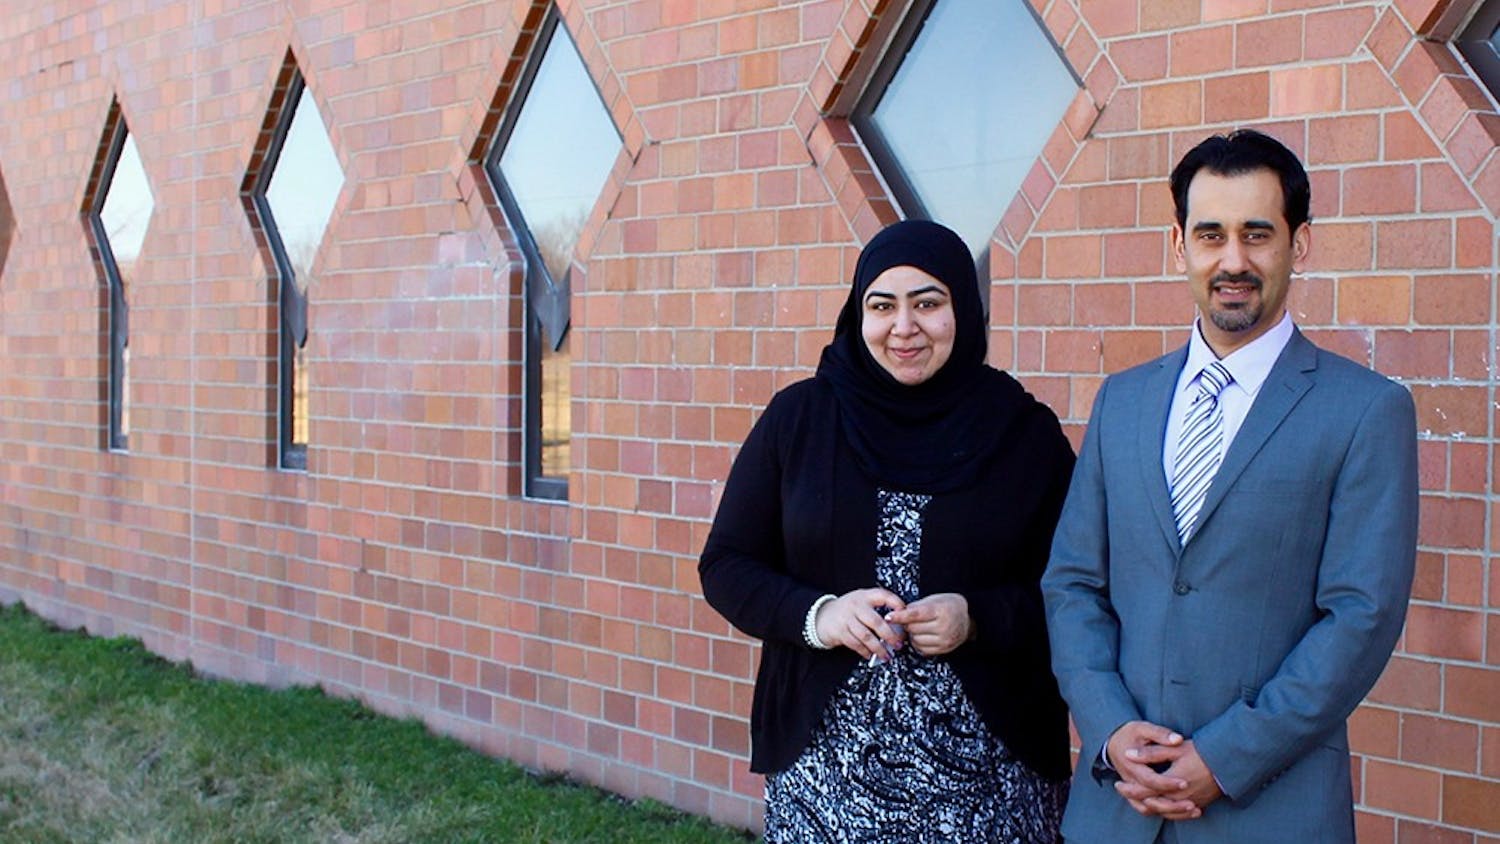 Faryal Khatri and Hazem Bata stand in front of the wall that was marred by anti Muslim graffiti over the weekend. A volunteer from the community scrubbed the wall clean the day of the incident. 